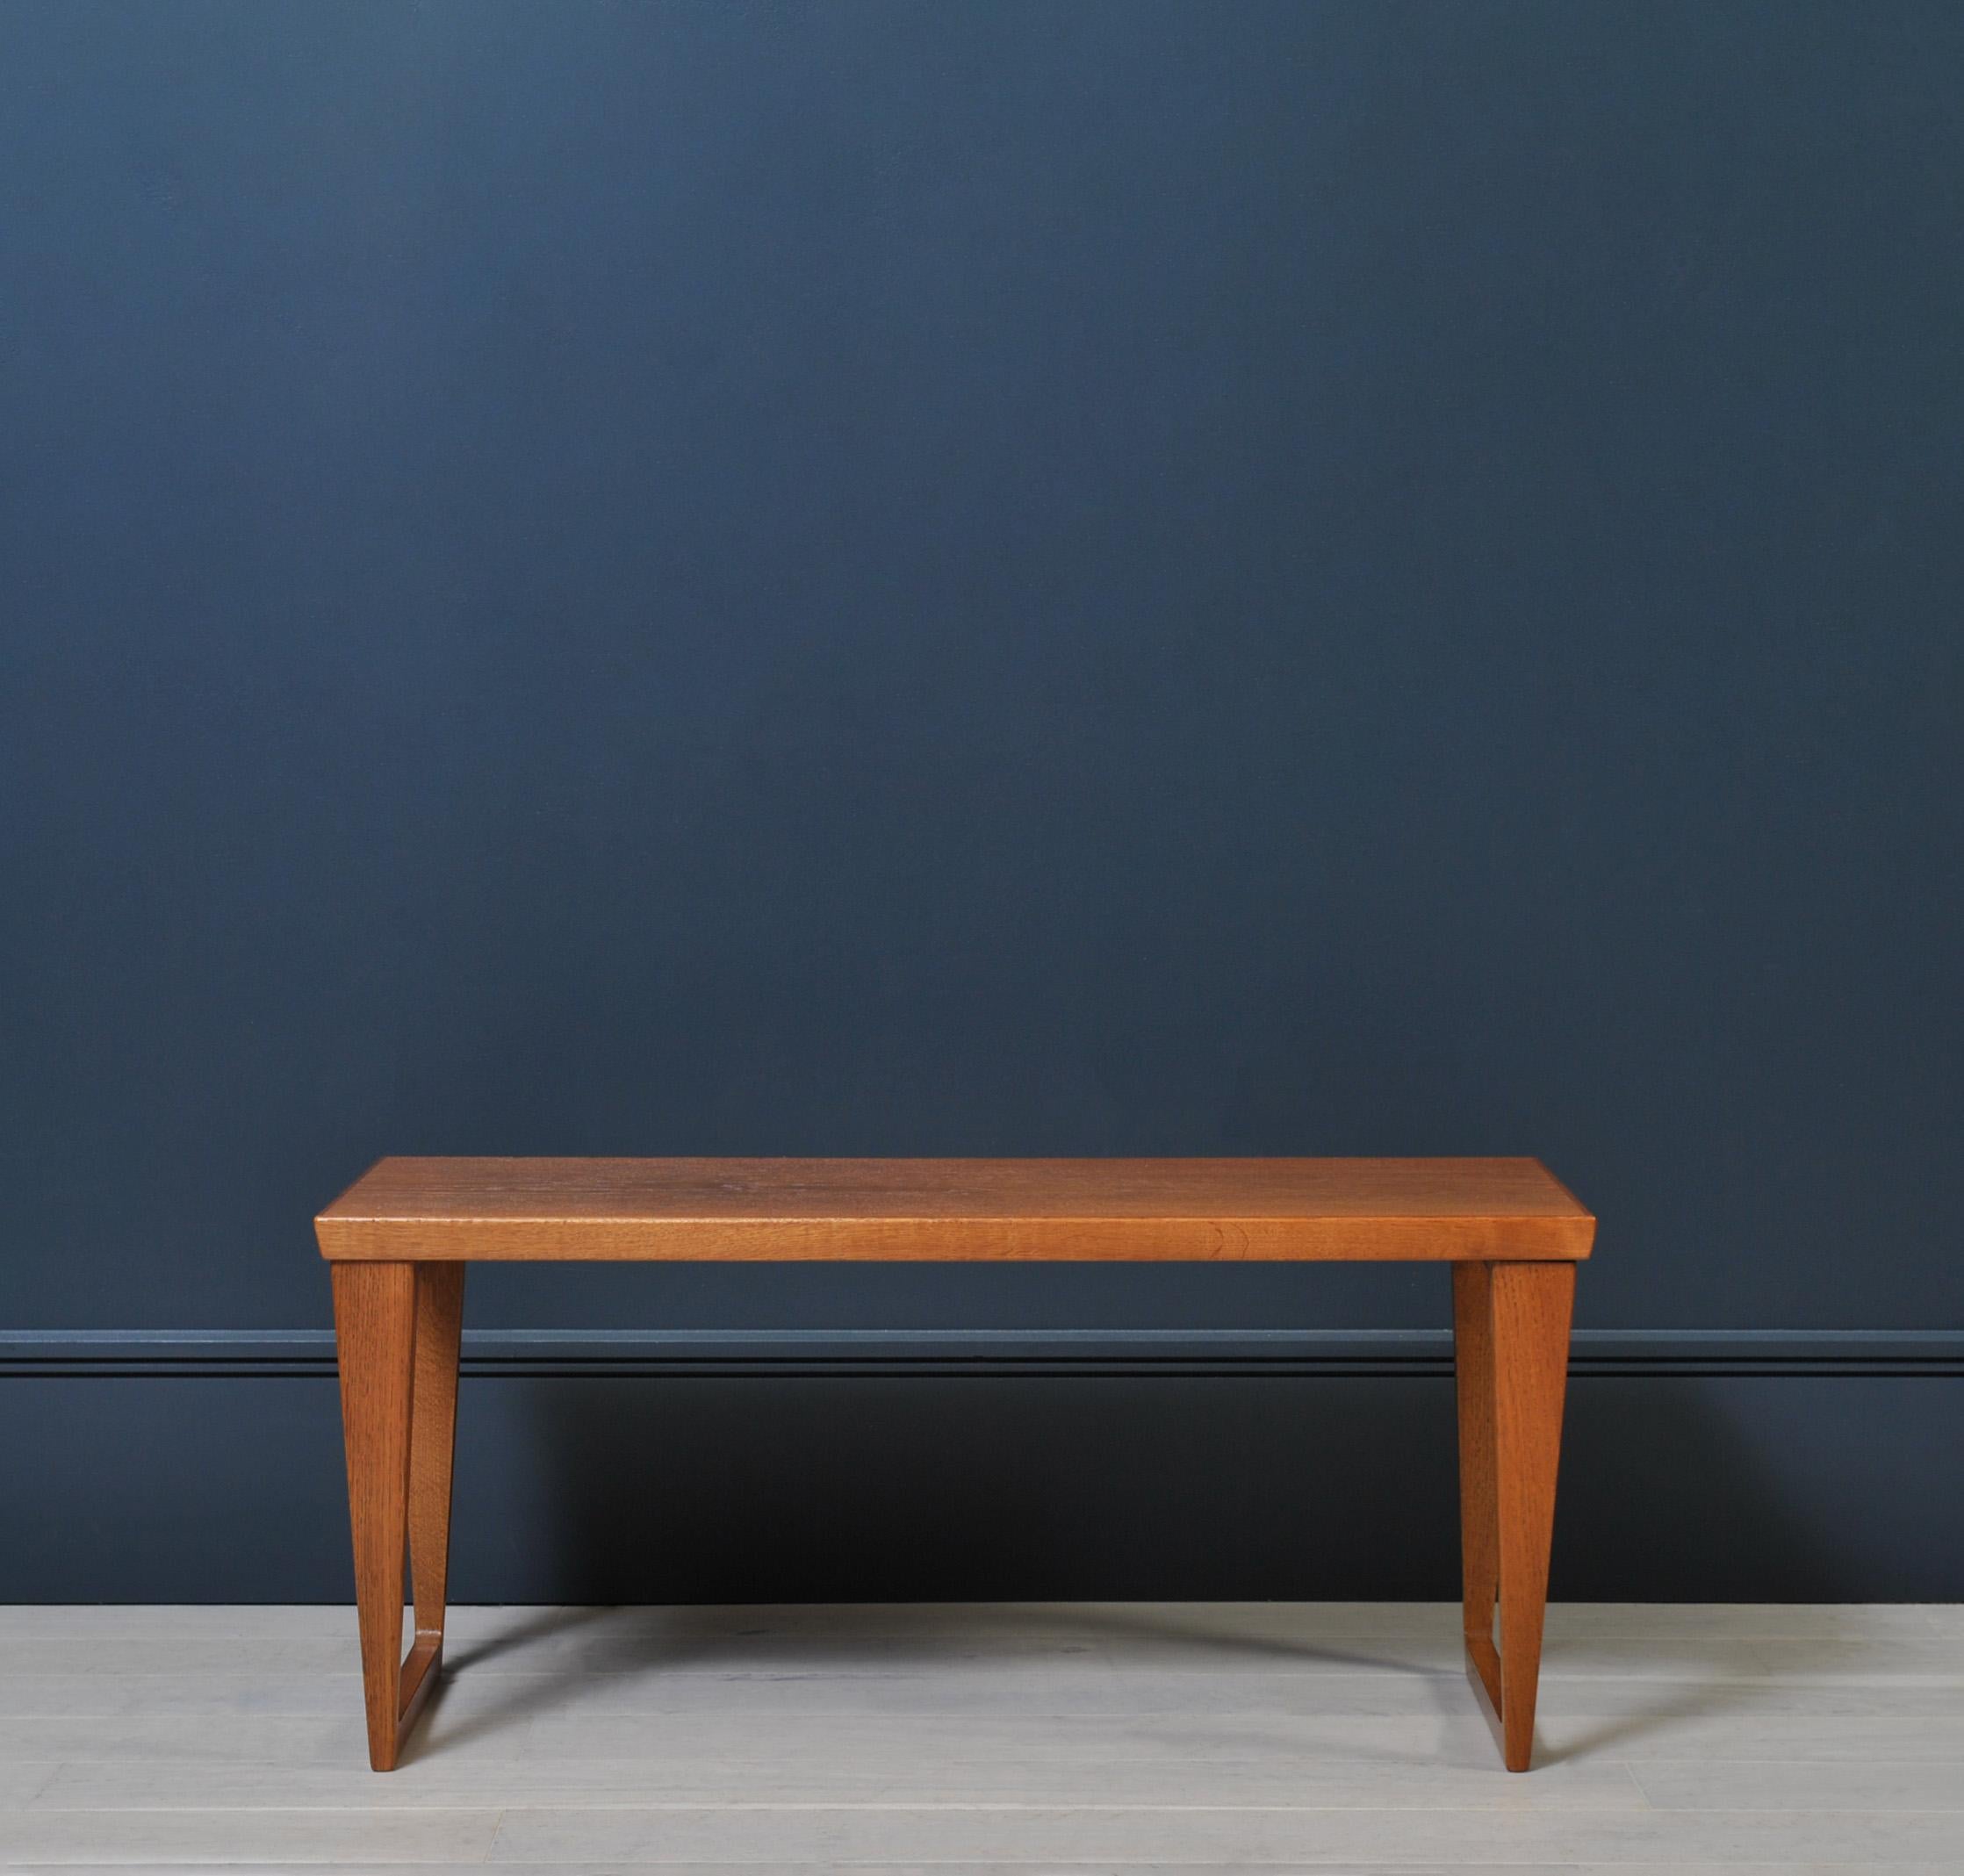 An Oak bench or table designed by Kai Kristiansen for Aksel Kjersagaard, Denmark circa 1960.
A truly classic piece of Scandinavian design. 
The legs will be unbolted for safer overseas shipping.